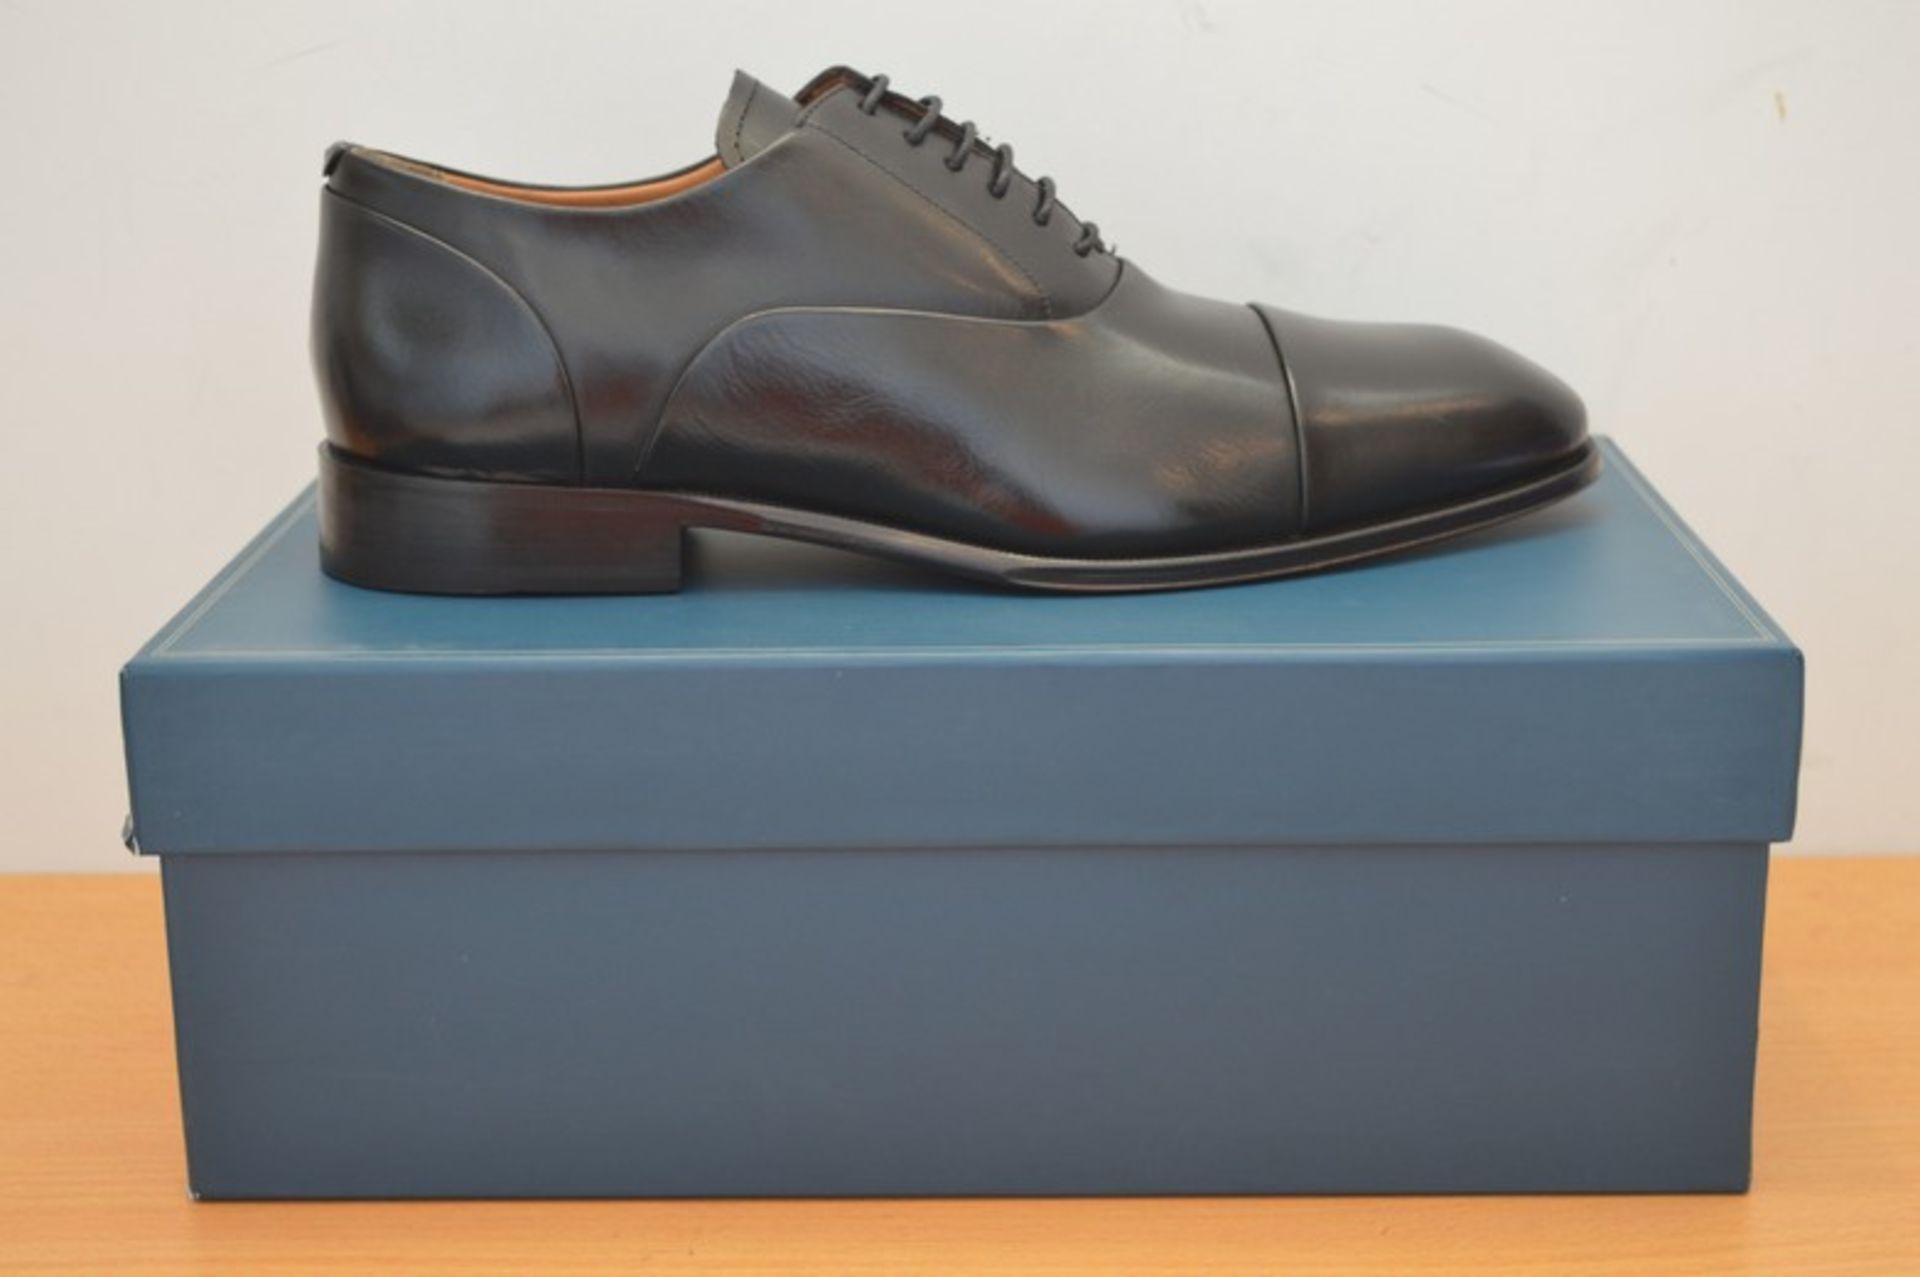 BOXED BRAND NEW JOHN LEWIS GOODWIN BLACK LEATHER GENTS SHOES IN SIZE 10 RRP £80